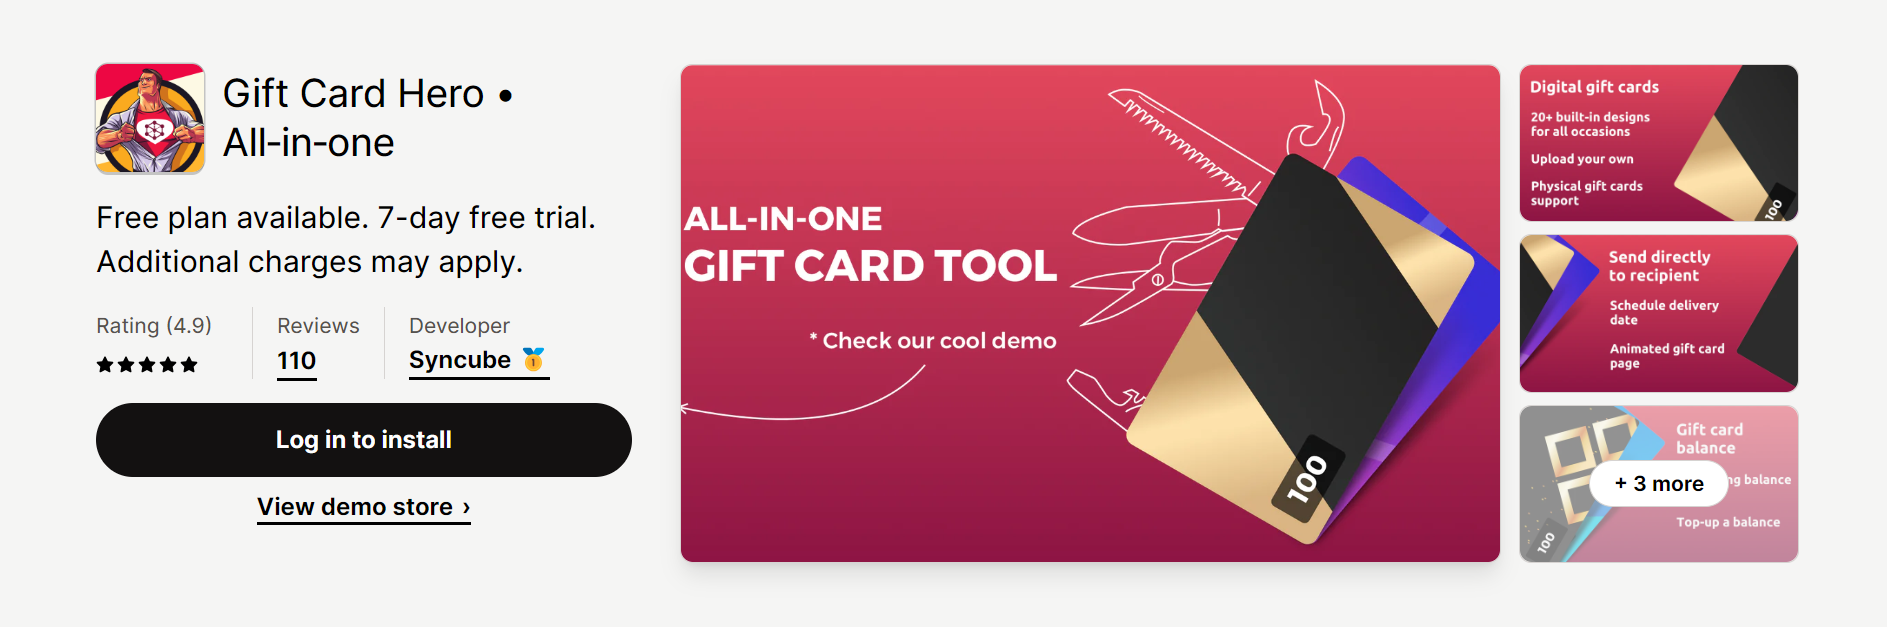 Gift Card Hero • All‑in‑one